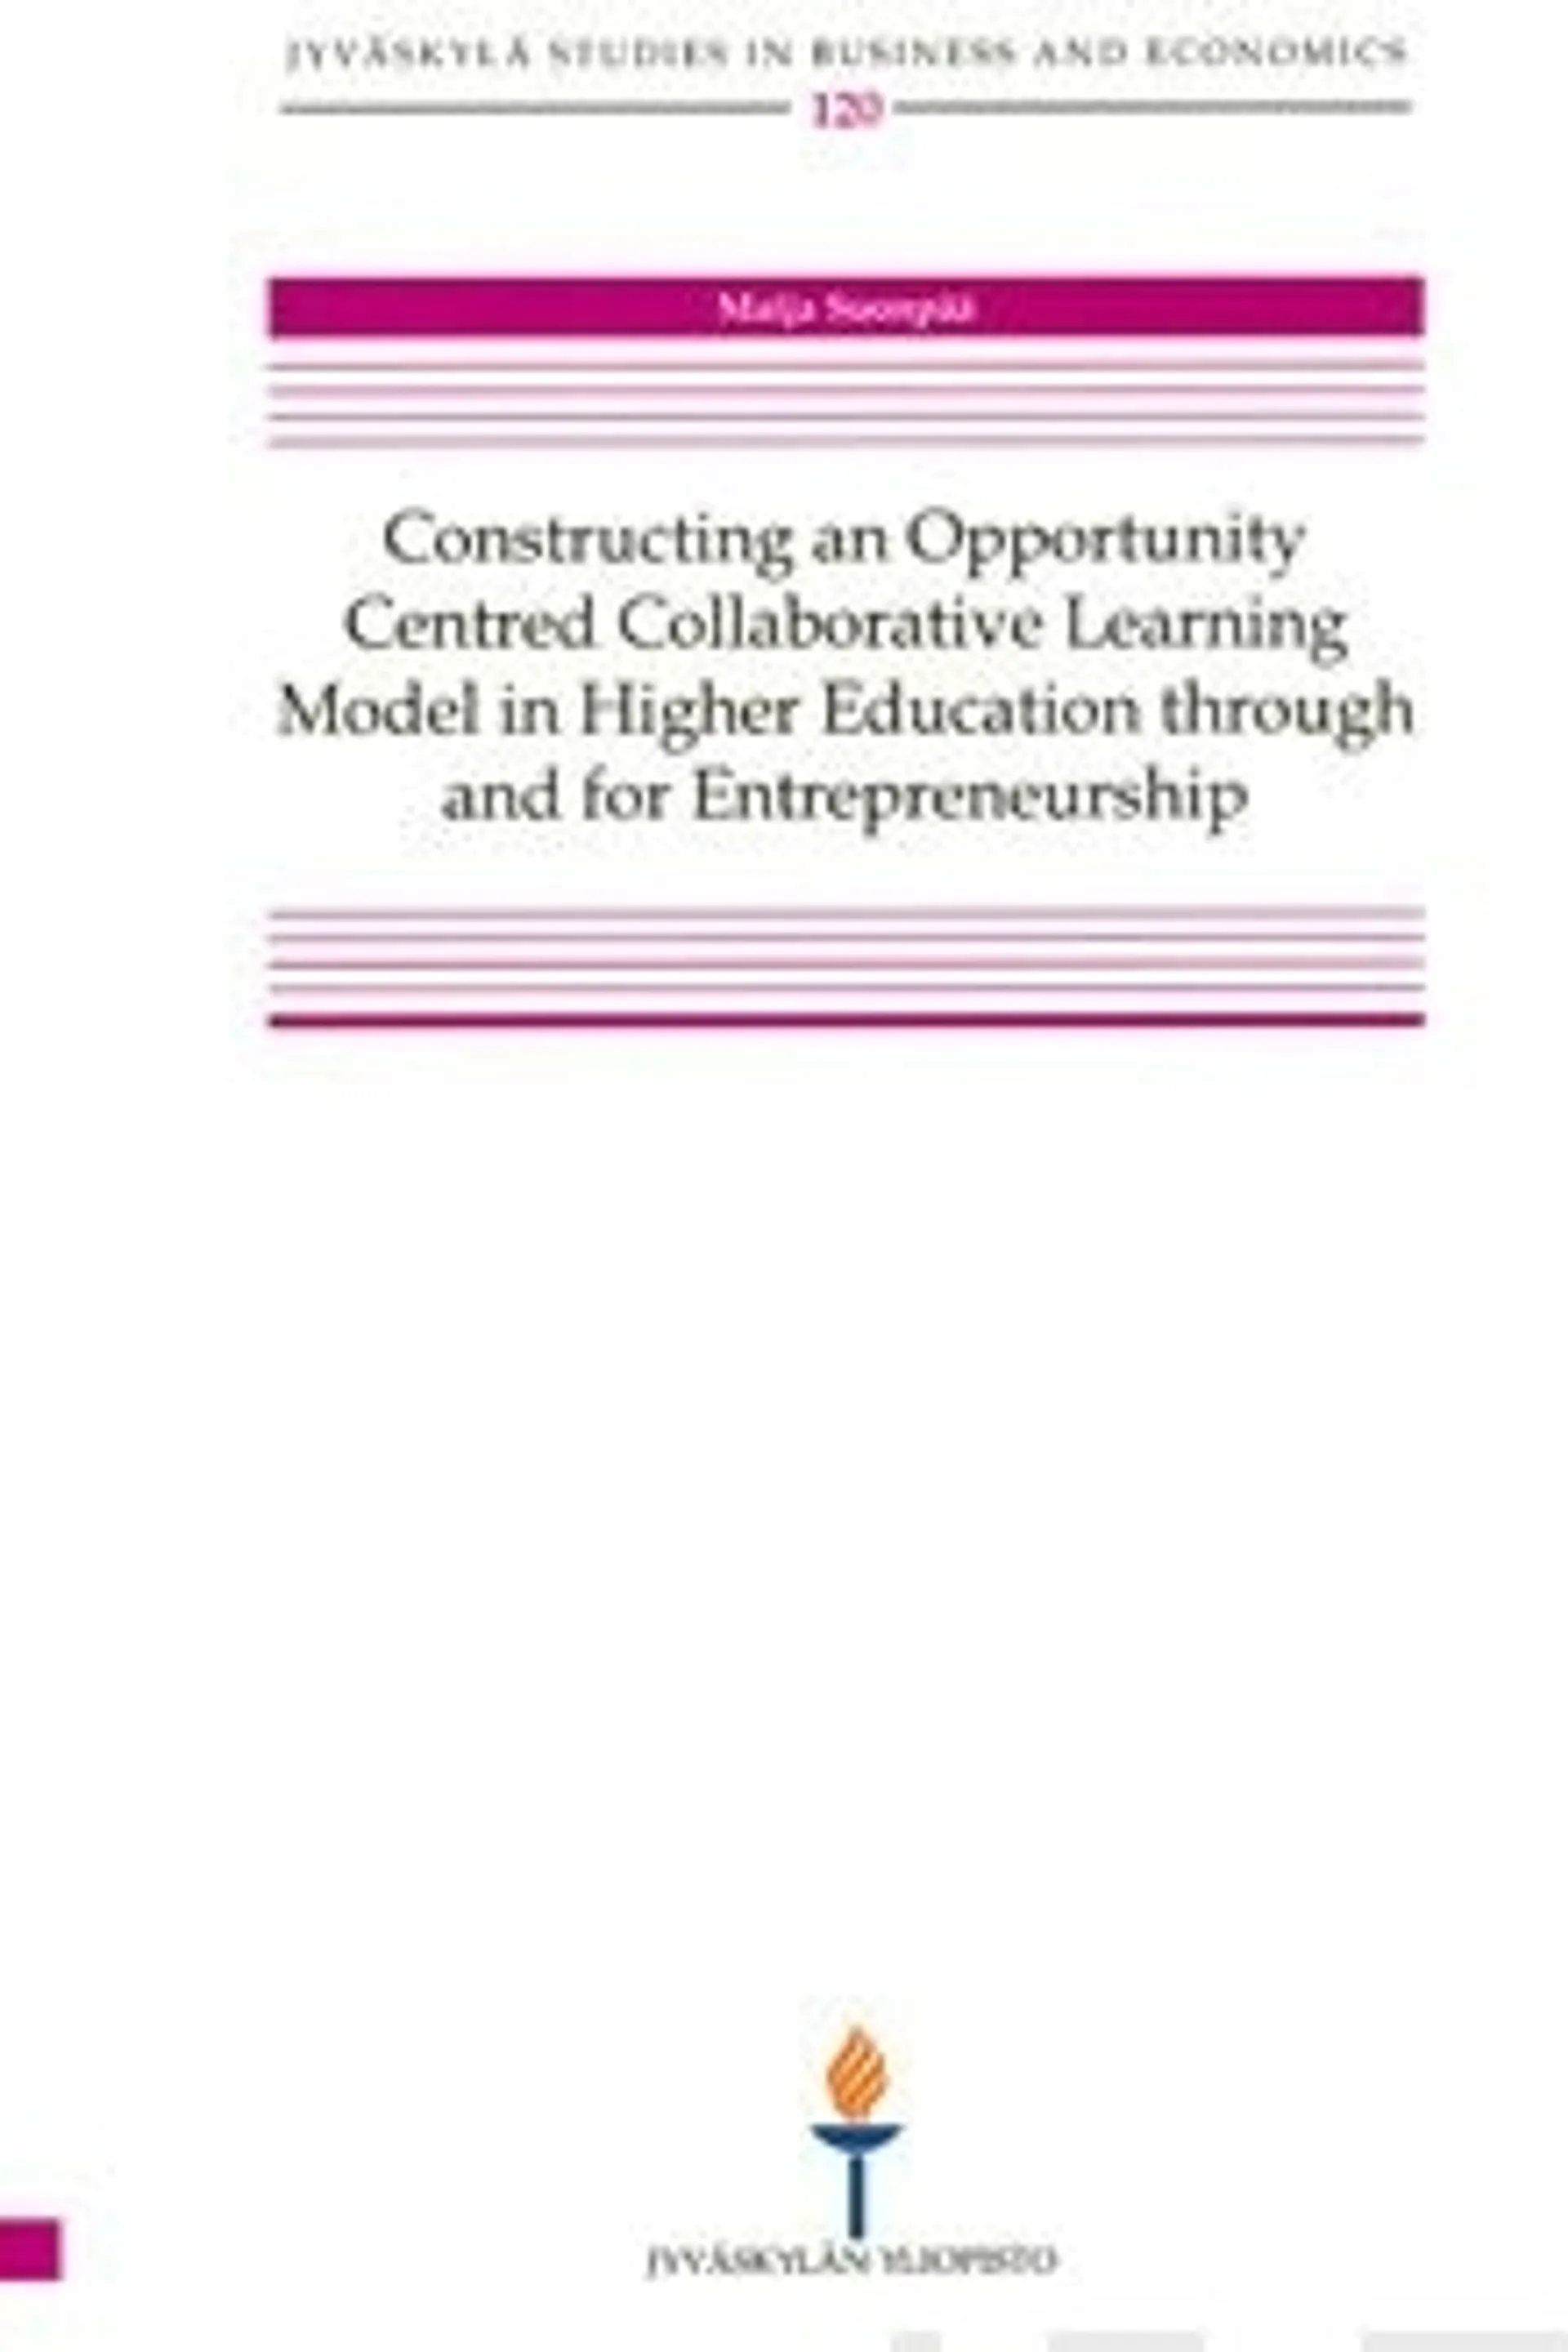 Suonpää, Construction an Opportunity Centred Collaborative Learning Model in HigherEducation through and for Entrepreneurship